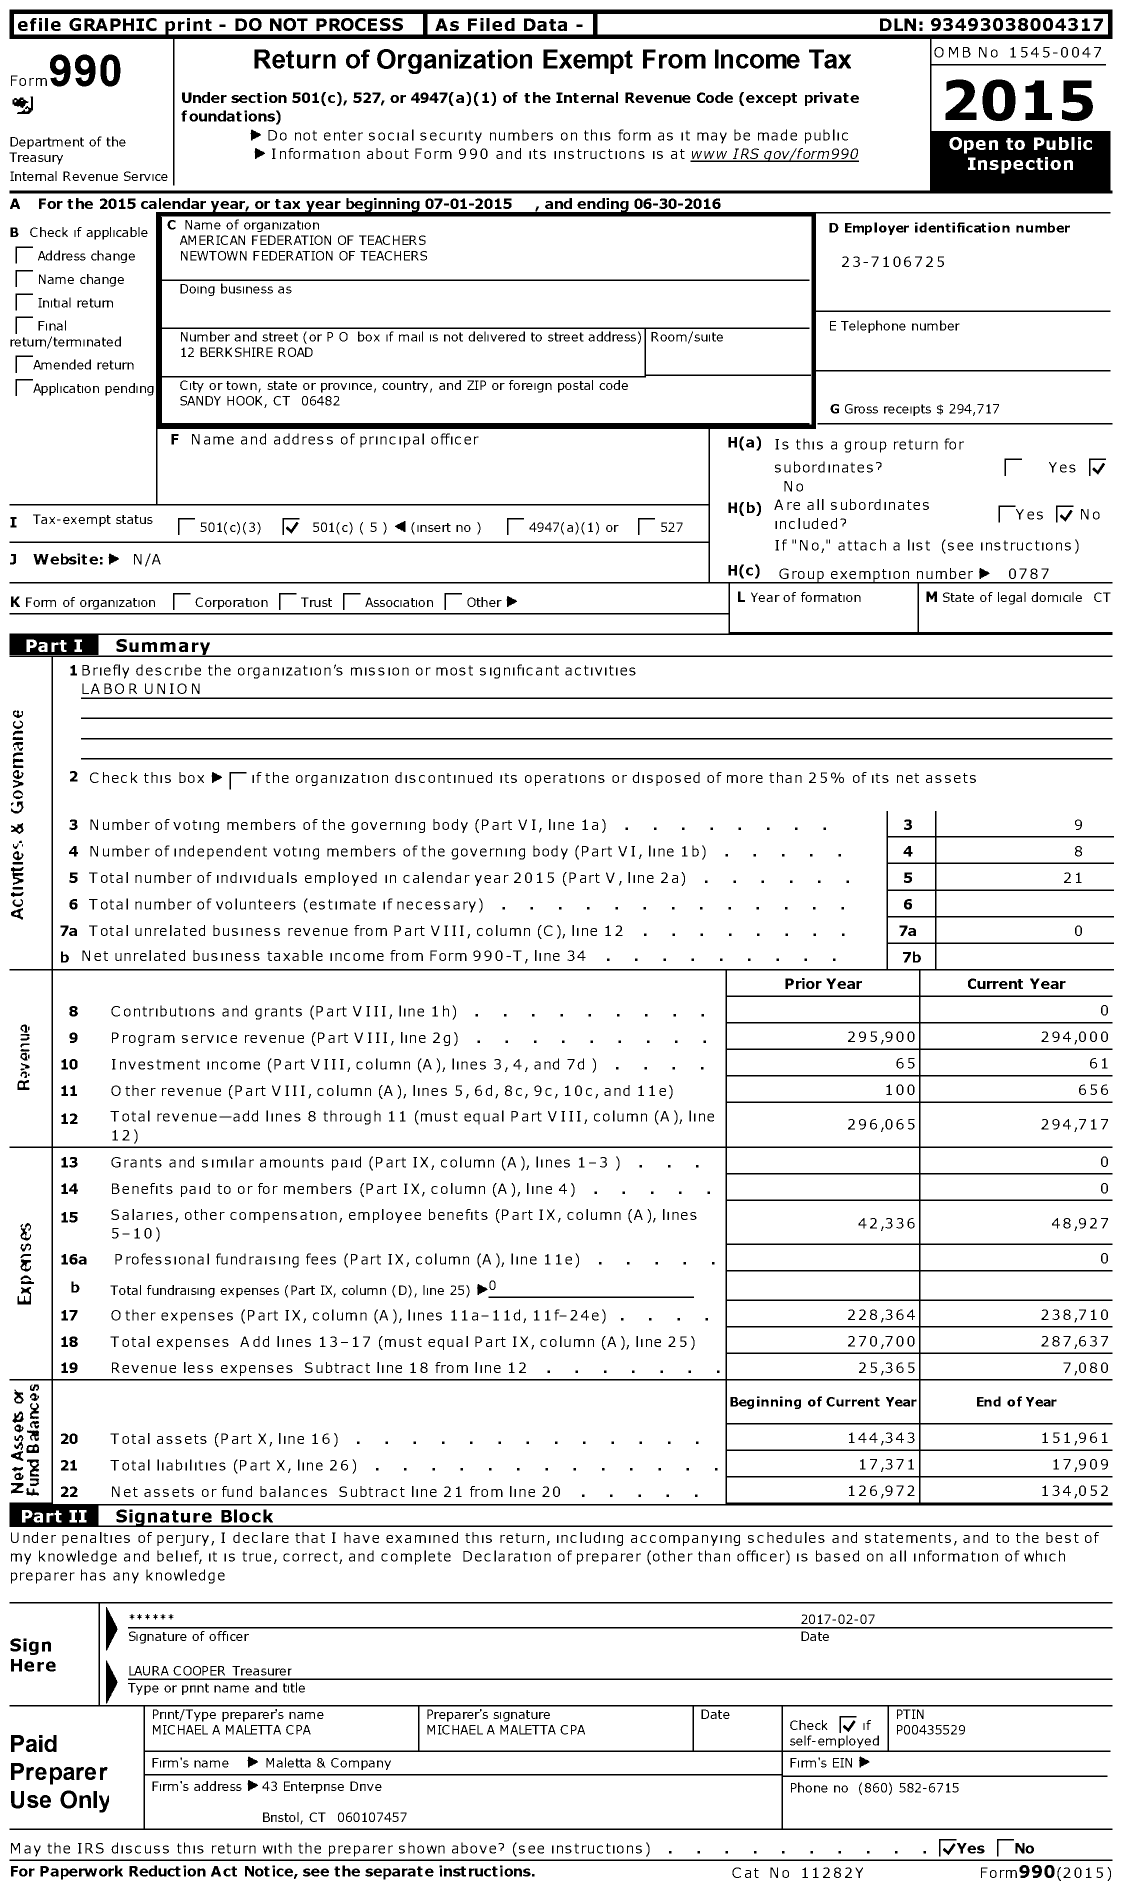 Image of first page of 2015 Form 990O for American Federation of Teachers Newtown Federation of Teachers